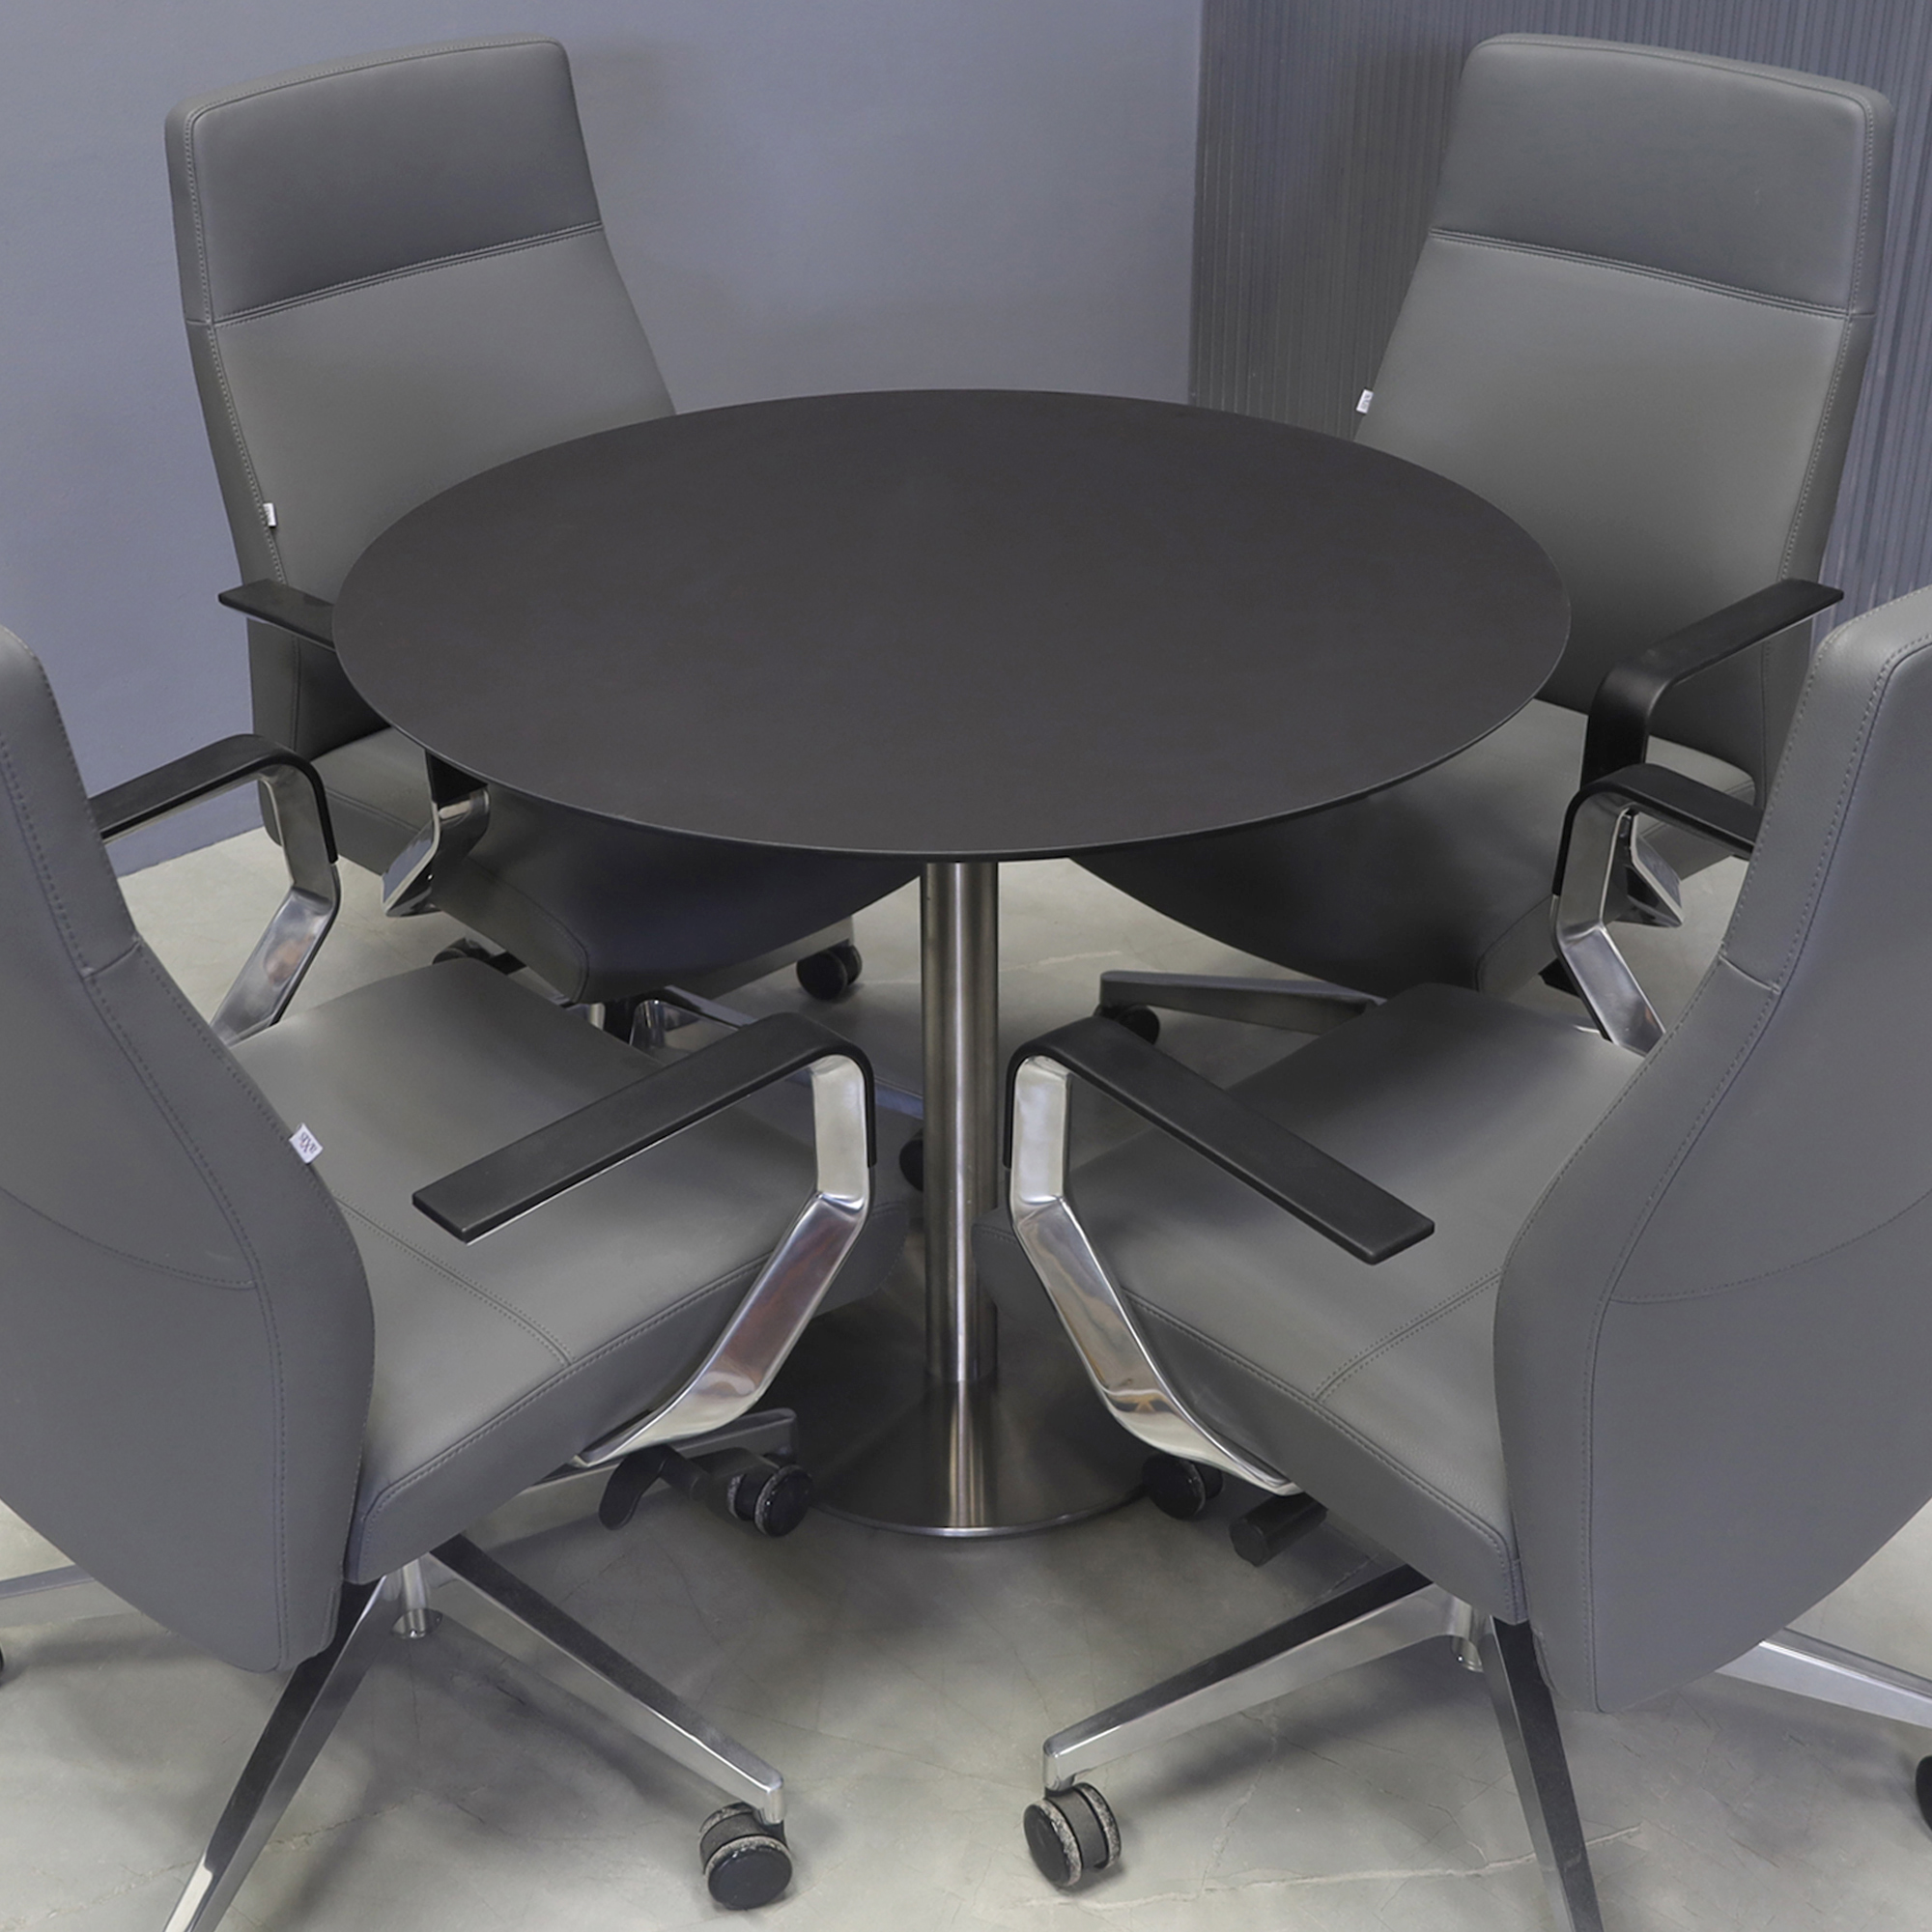 36-inch California Round Conference/Cafeteria Table in 1/2